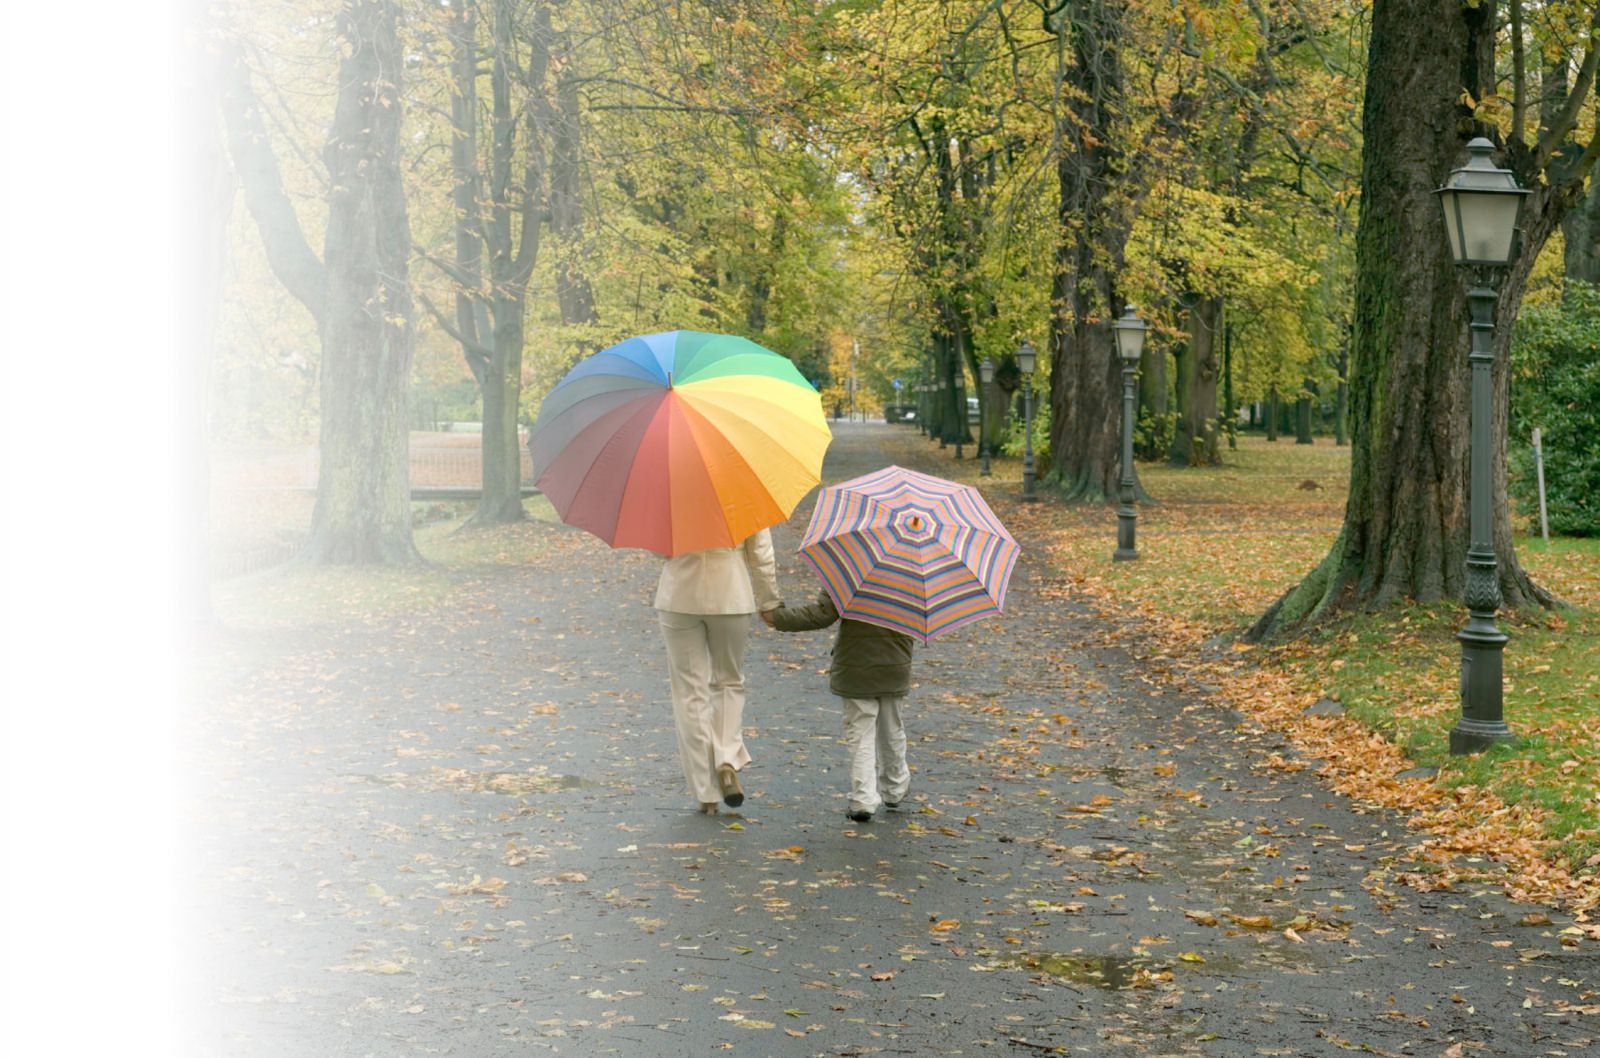 A parent and child walking through the park holding umbrellas